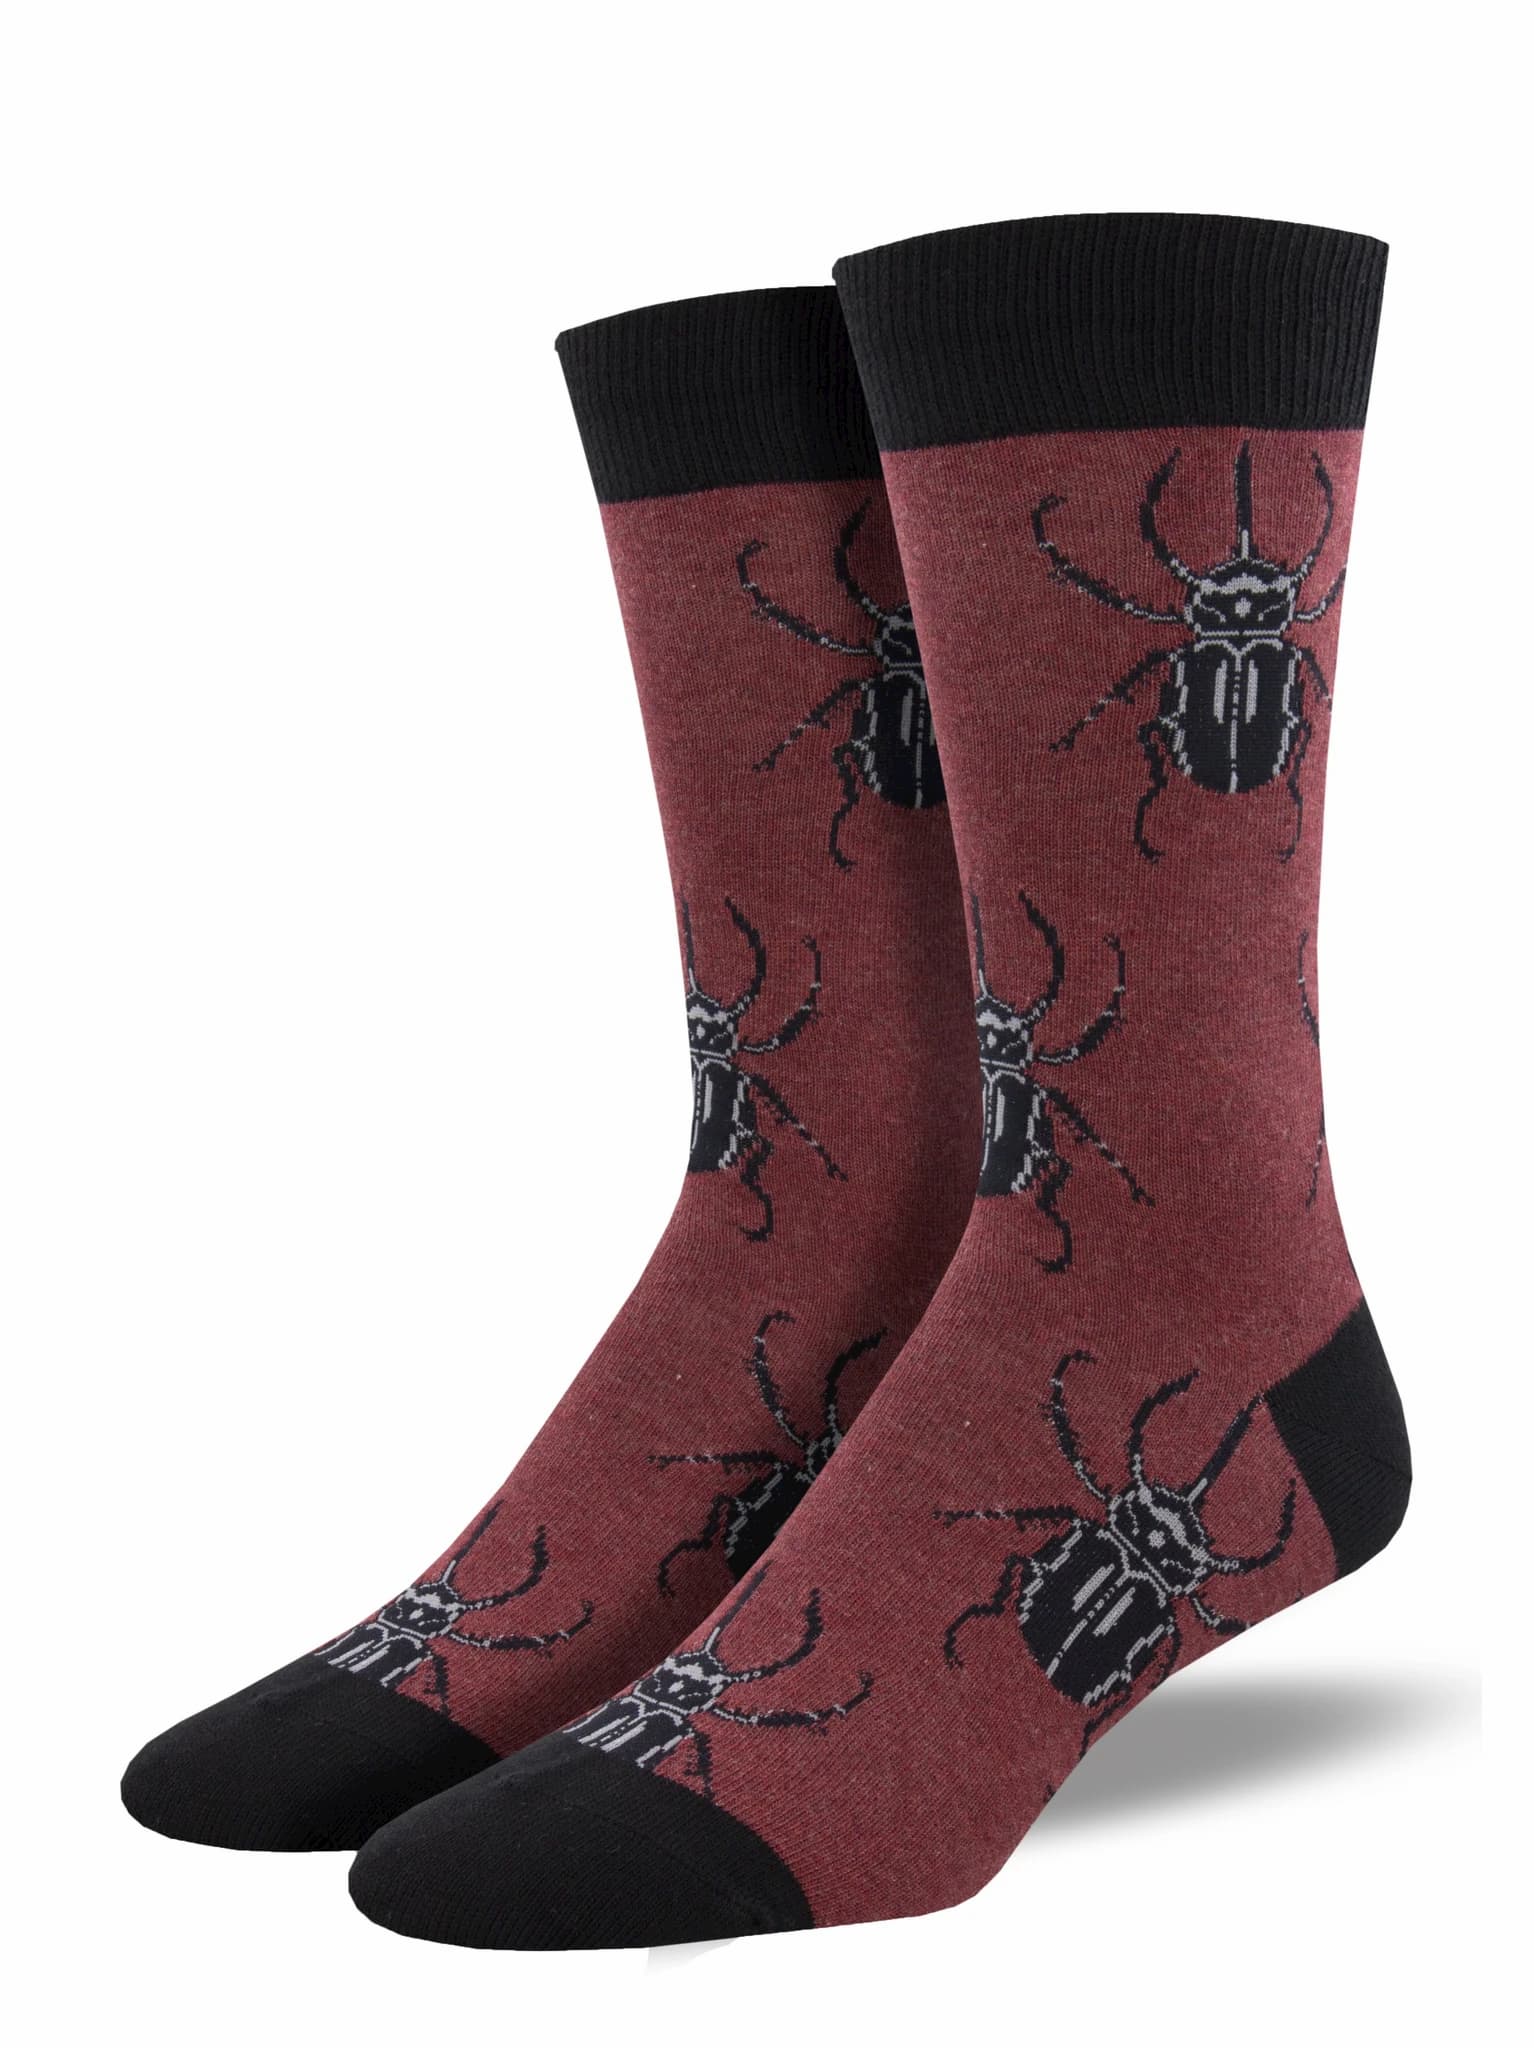 Mens wine red cotton sock with a design of black scarab beetles